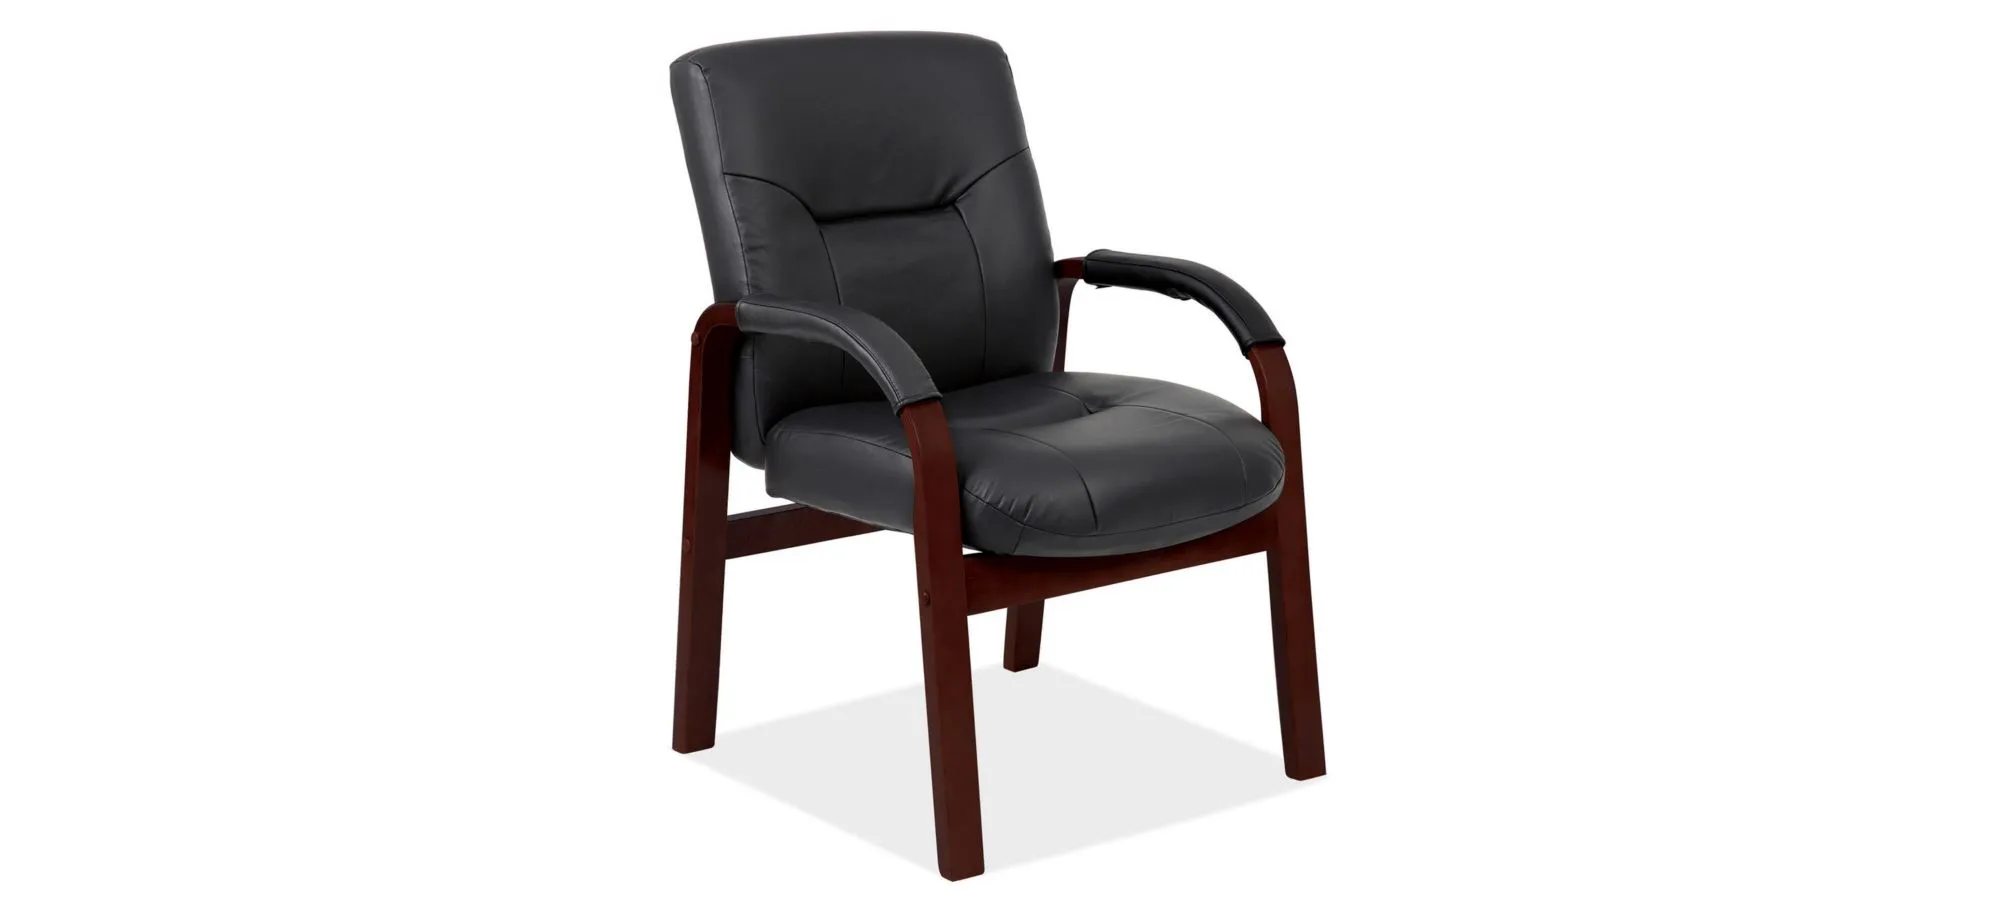 Midrealm Guest Chair in Black Leather Soft Vinyl; Mahogany by Coe Distributors